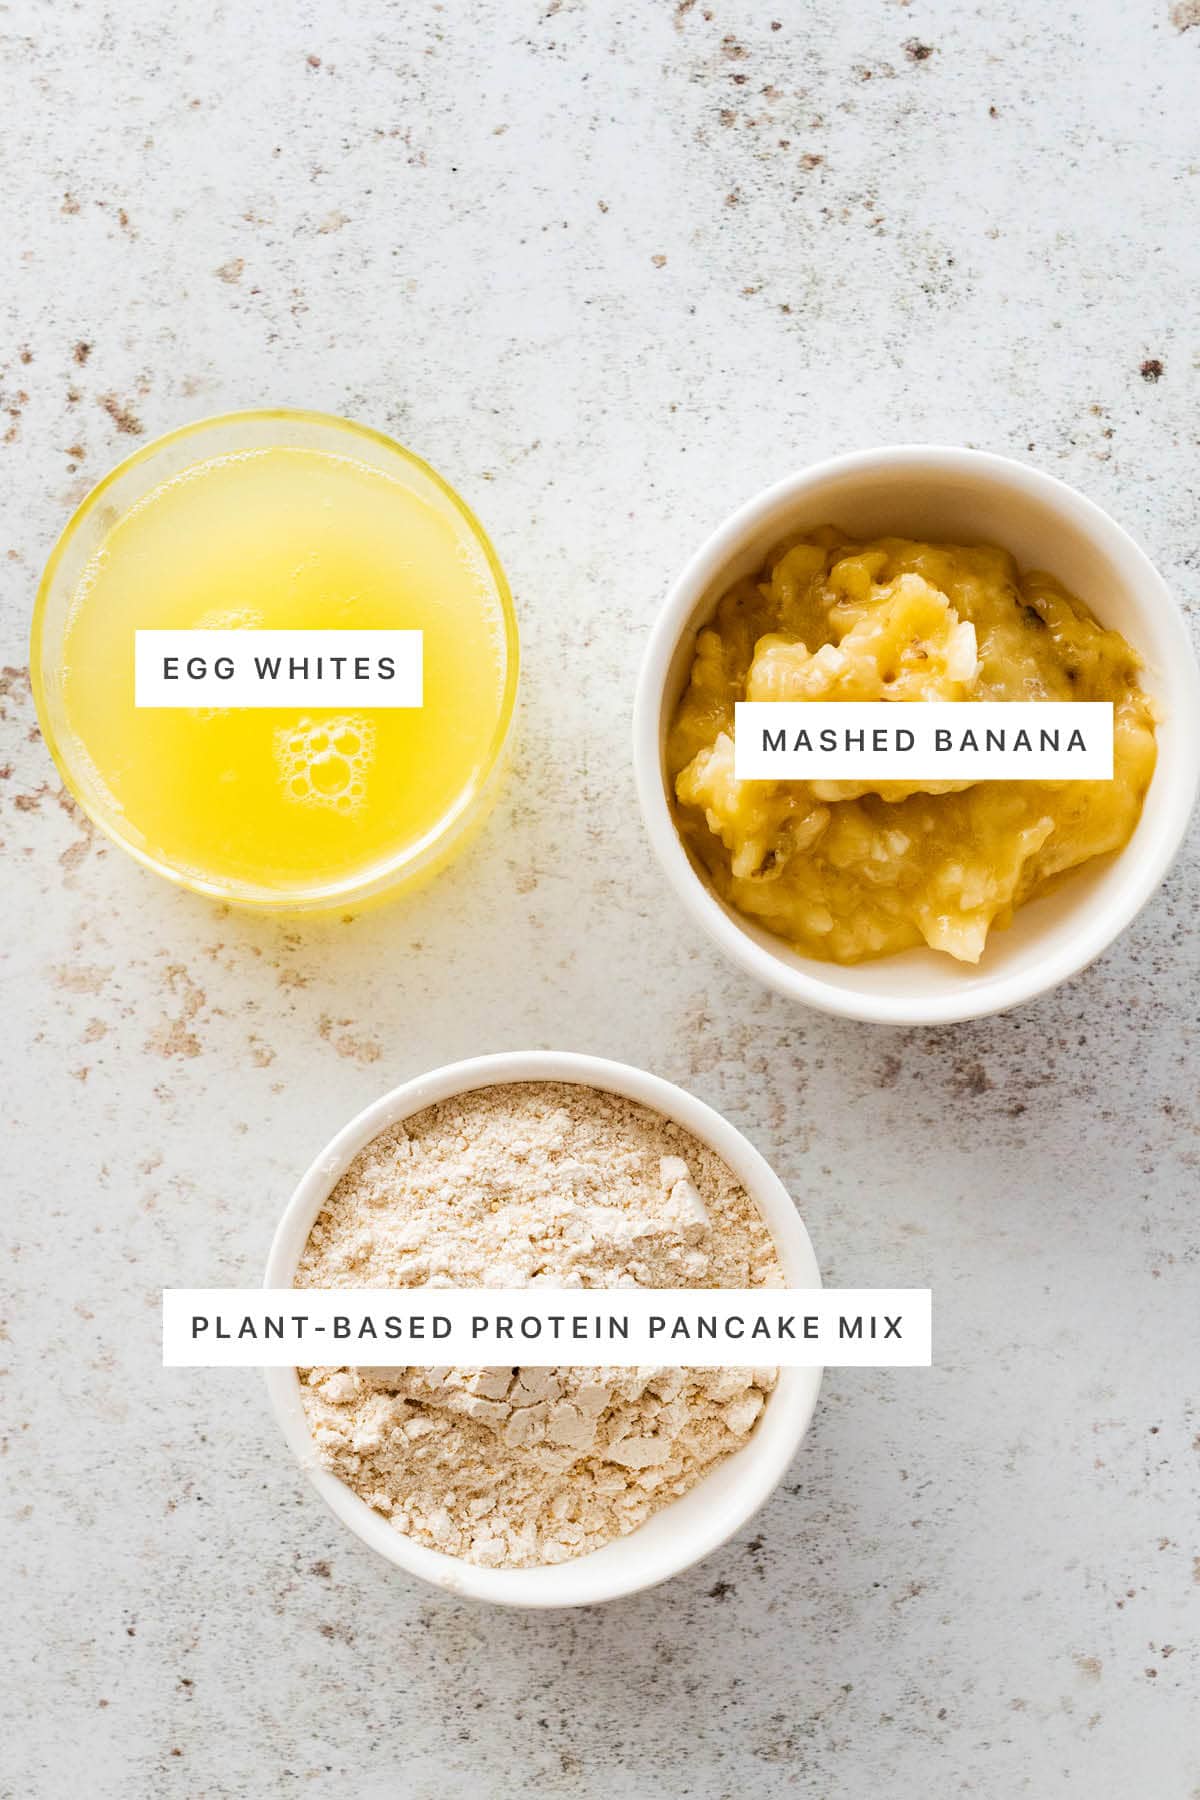 Ingredients measured out to make a Protein Pancake Bowl: egg whites, plant-based protein pancake mix and mashed banana.